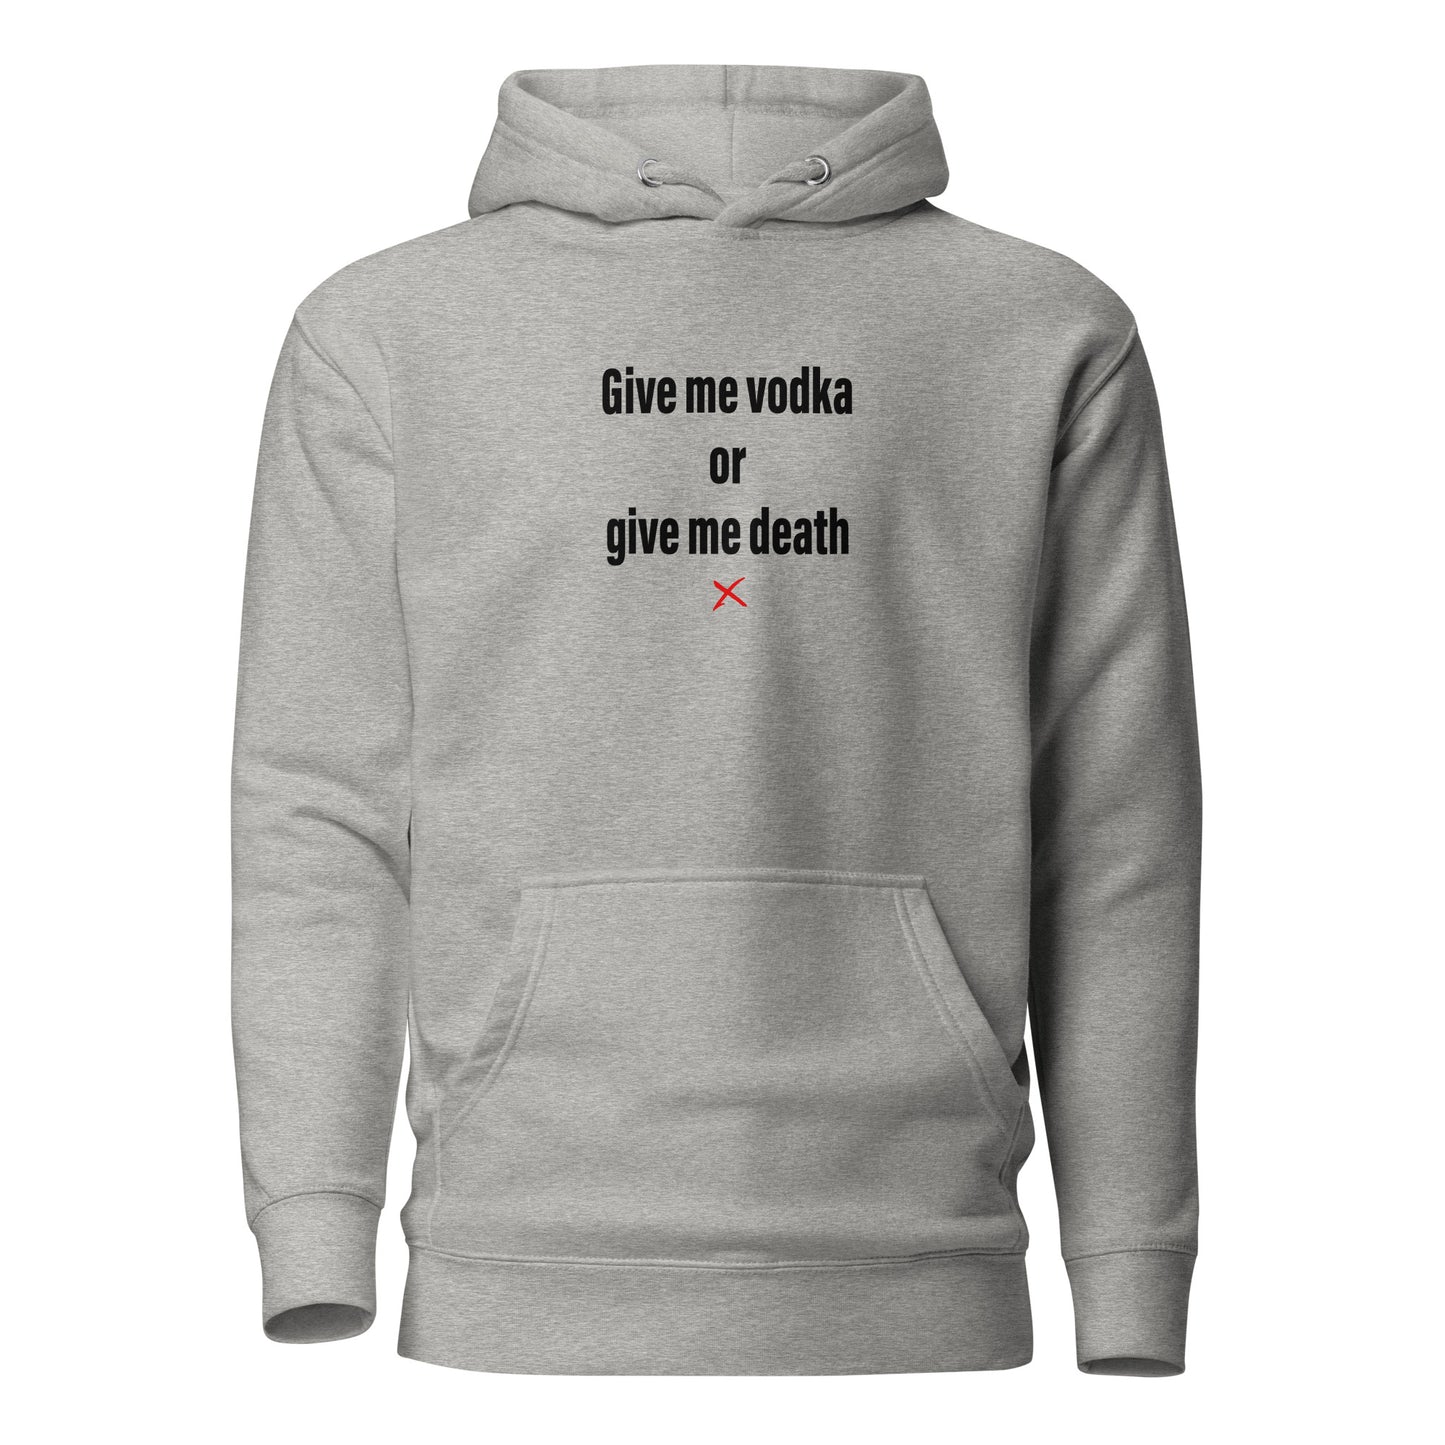 Give me vodka or give me death - Hoodie